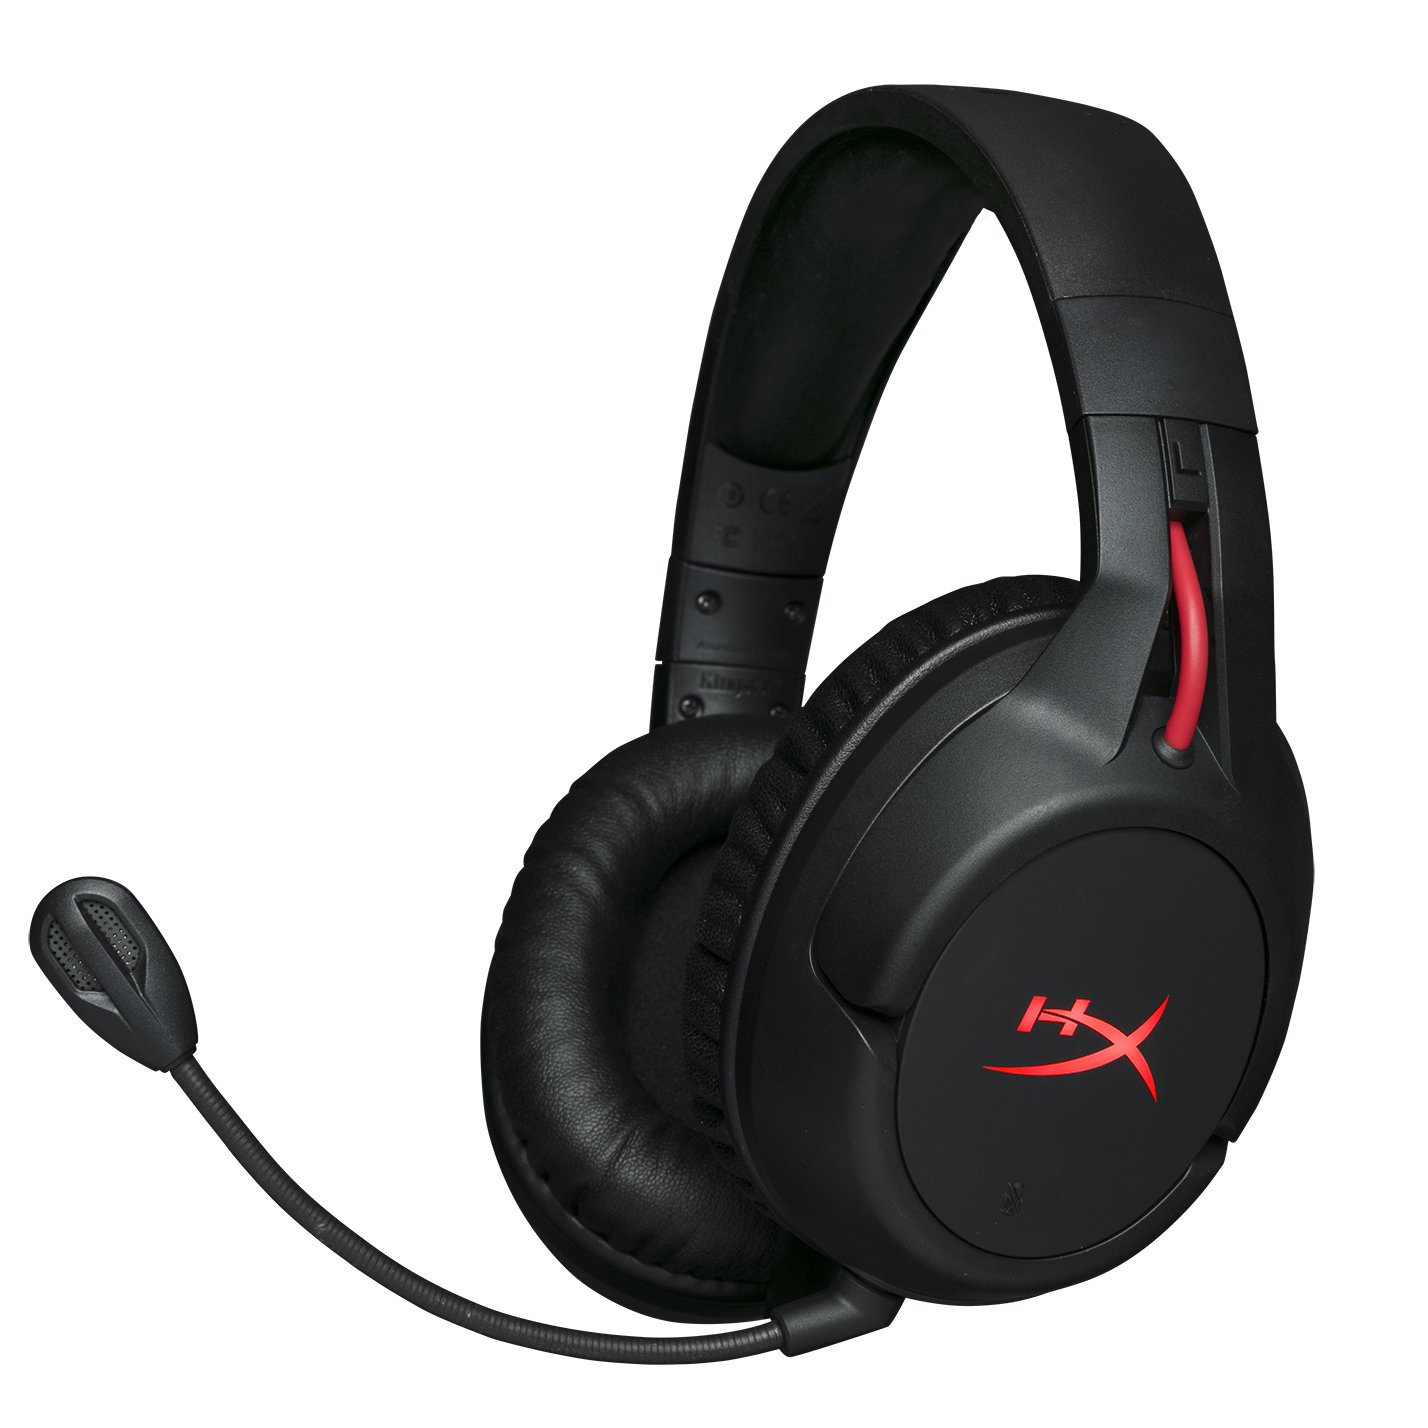 HyperX Cloud Flight Wireless Gaming Headset w/ Detachable Noise-Cancelling Microphone $70 + Free Shipping